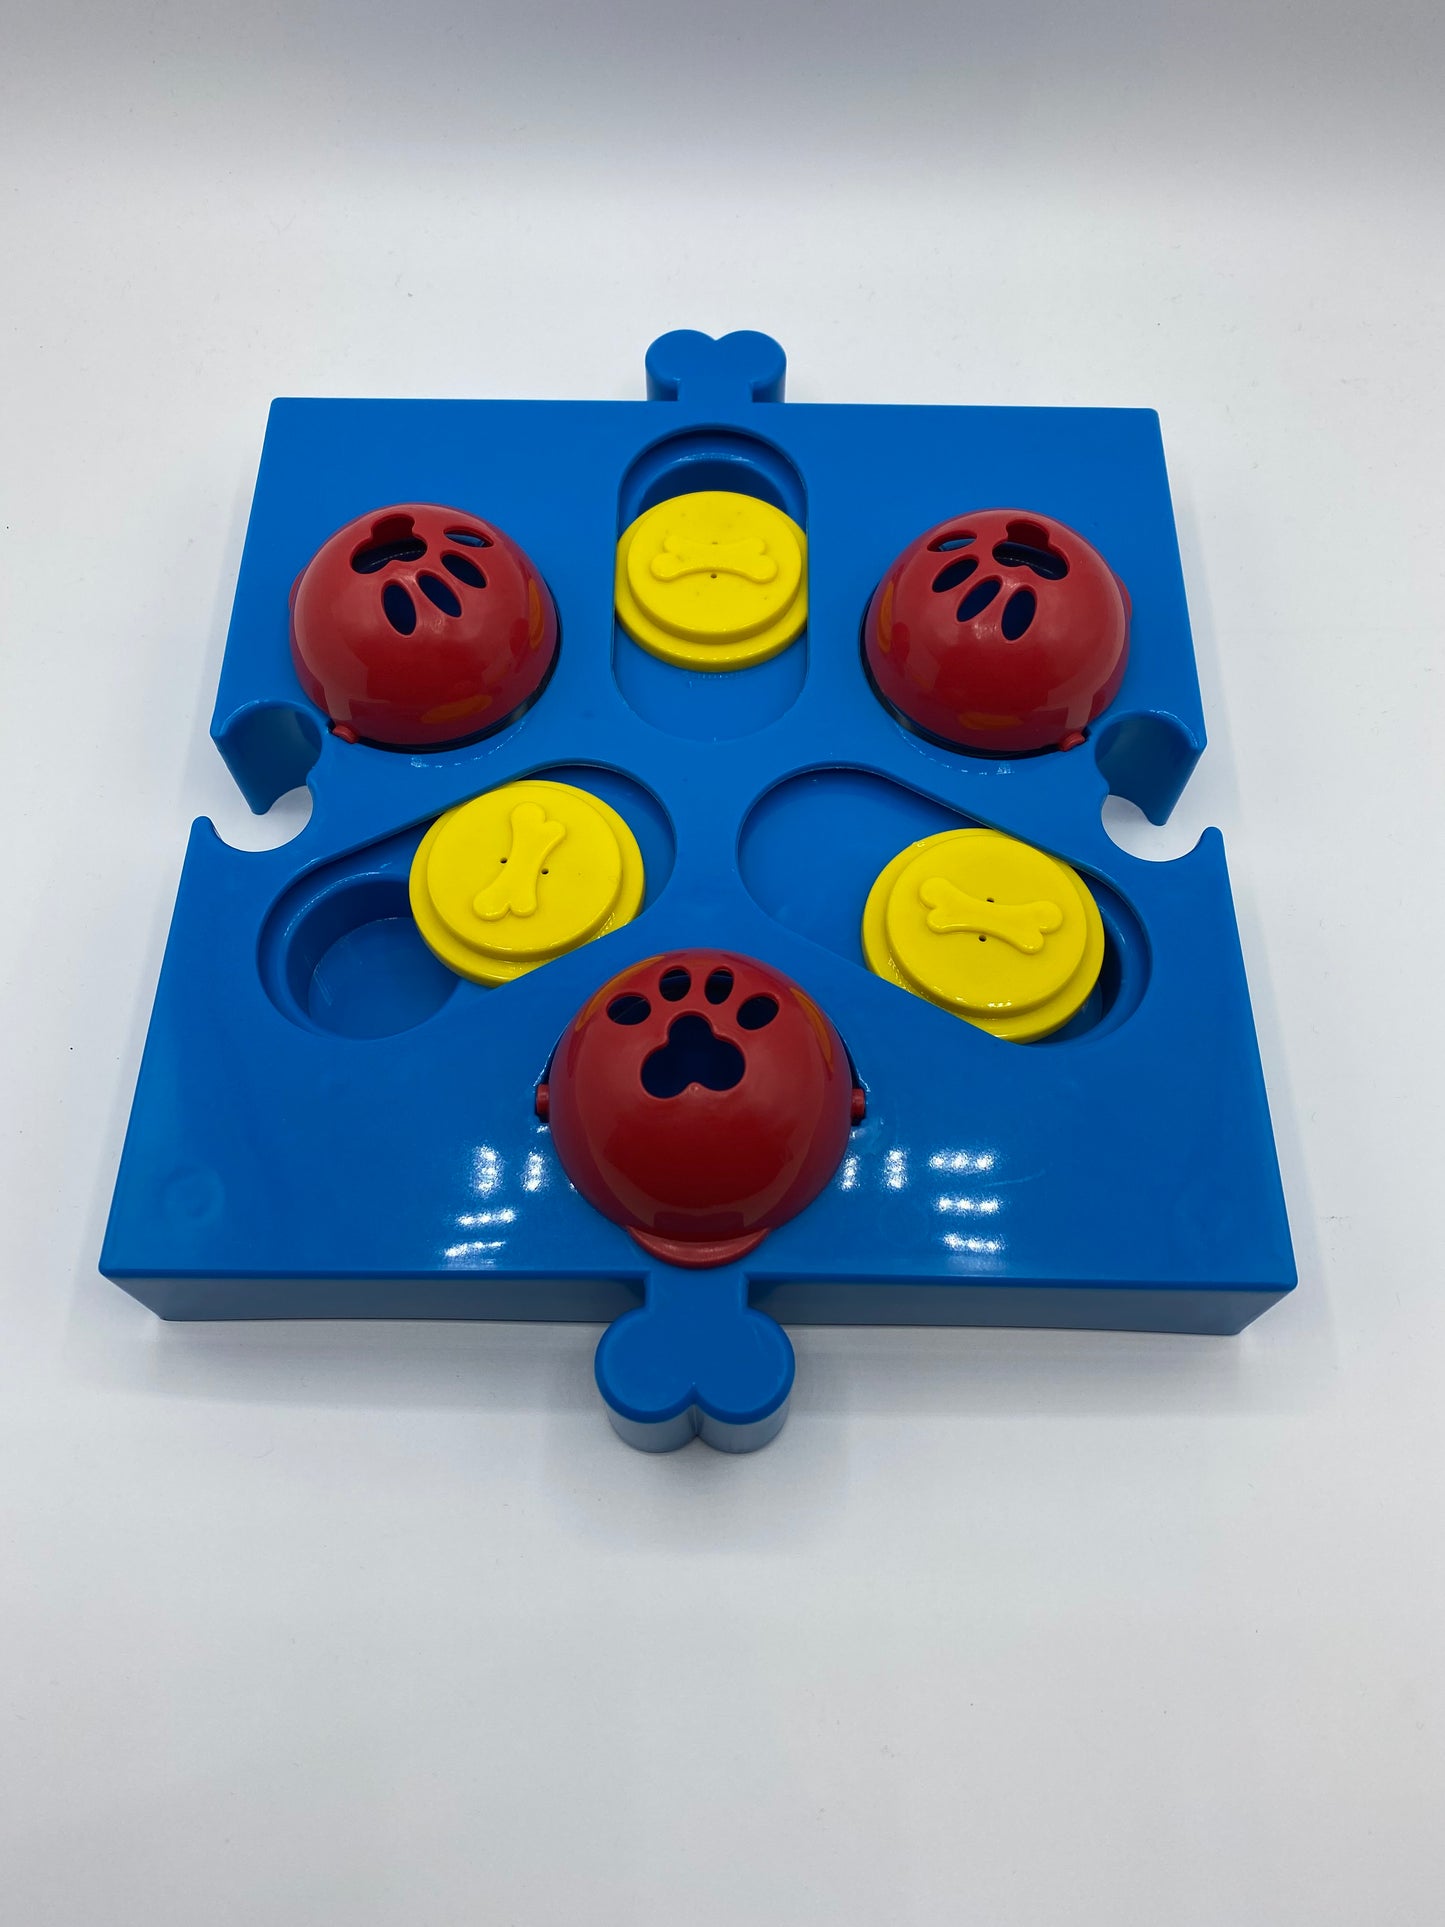 Connectable Fun Puzzzle and Interactive Seeking Dog Toy